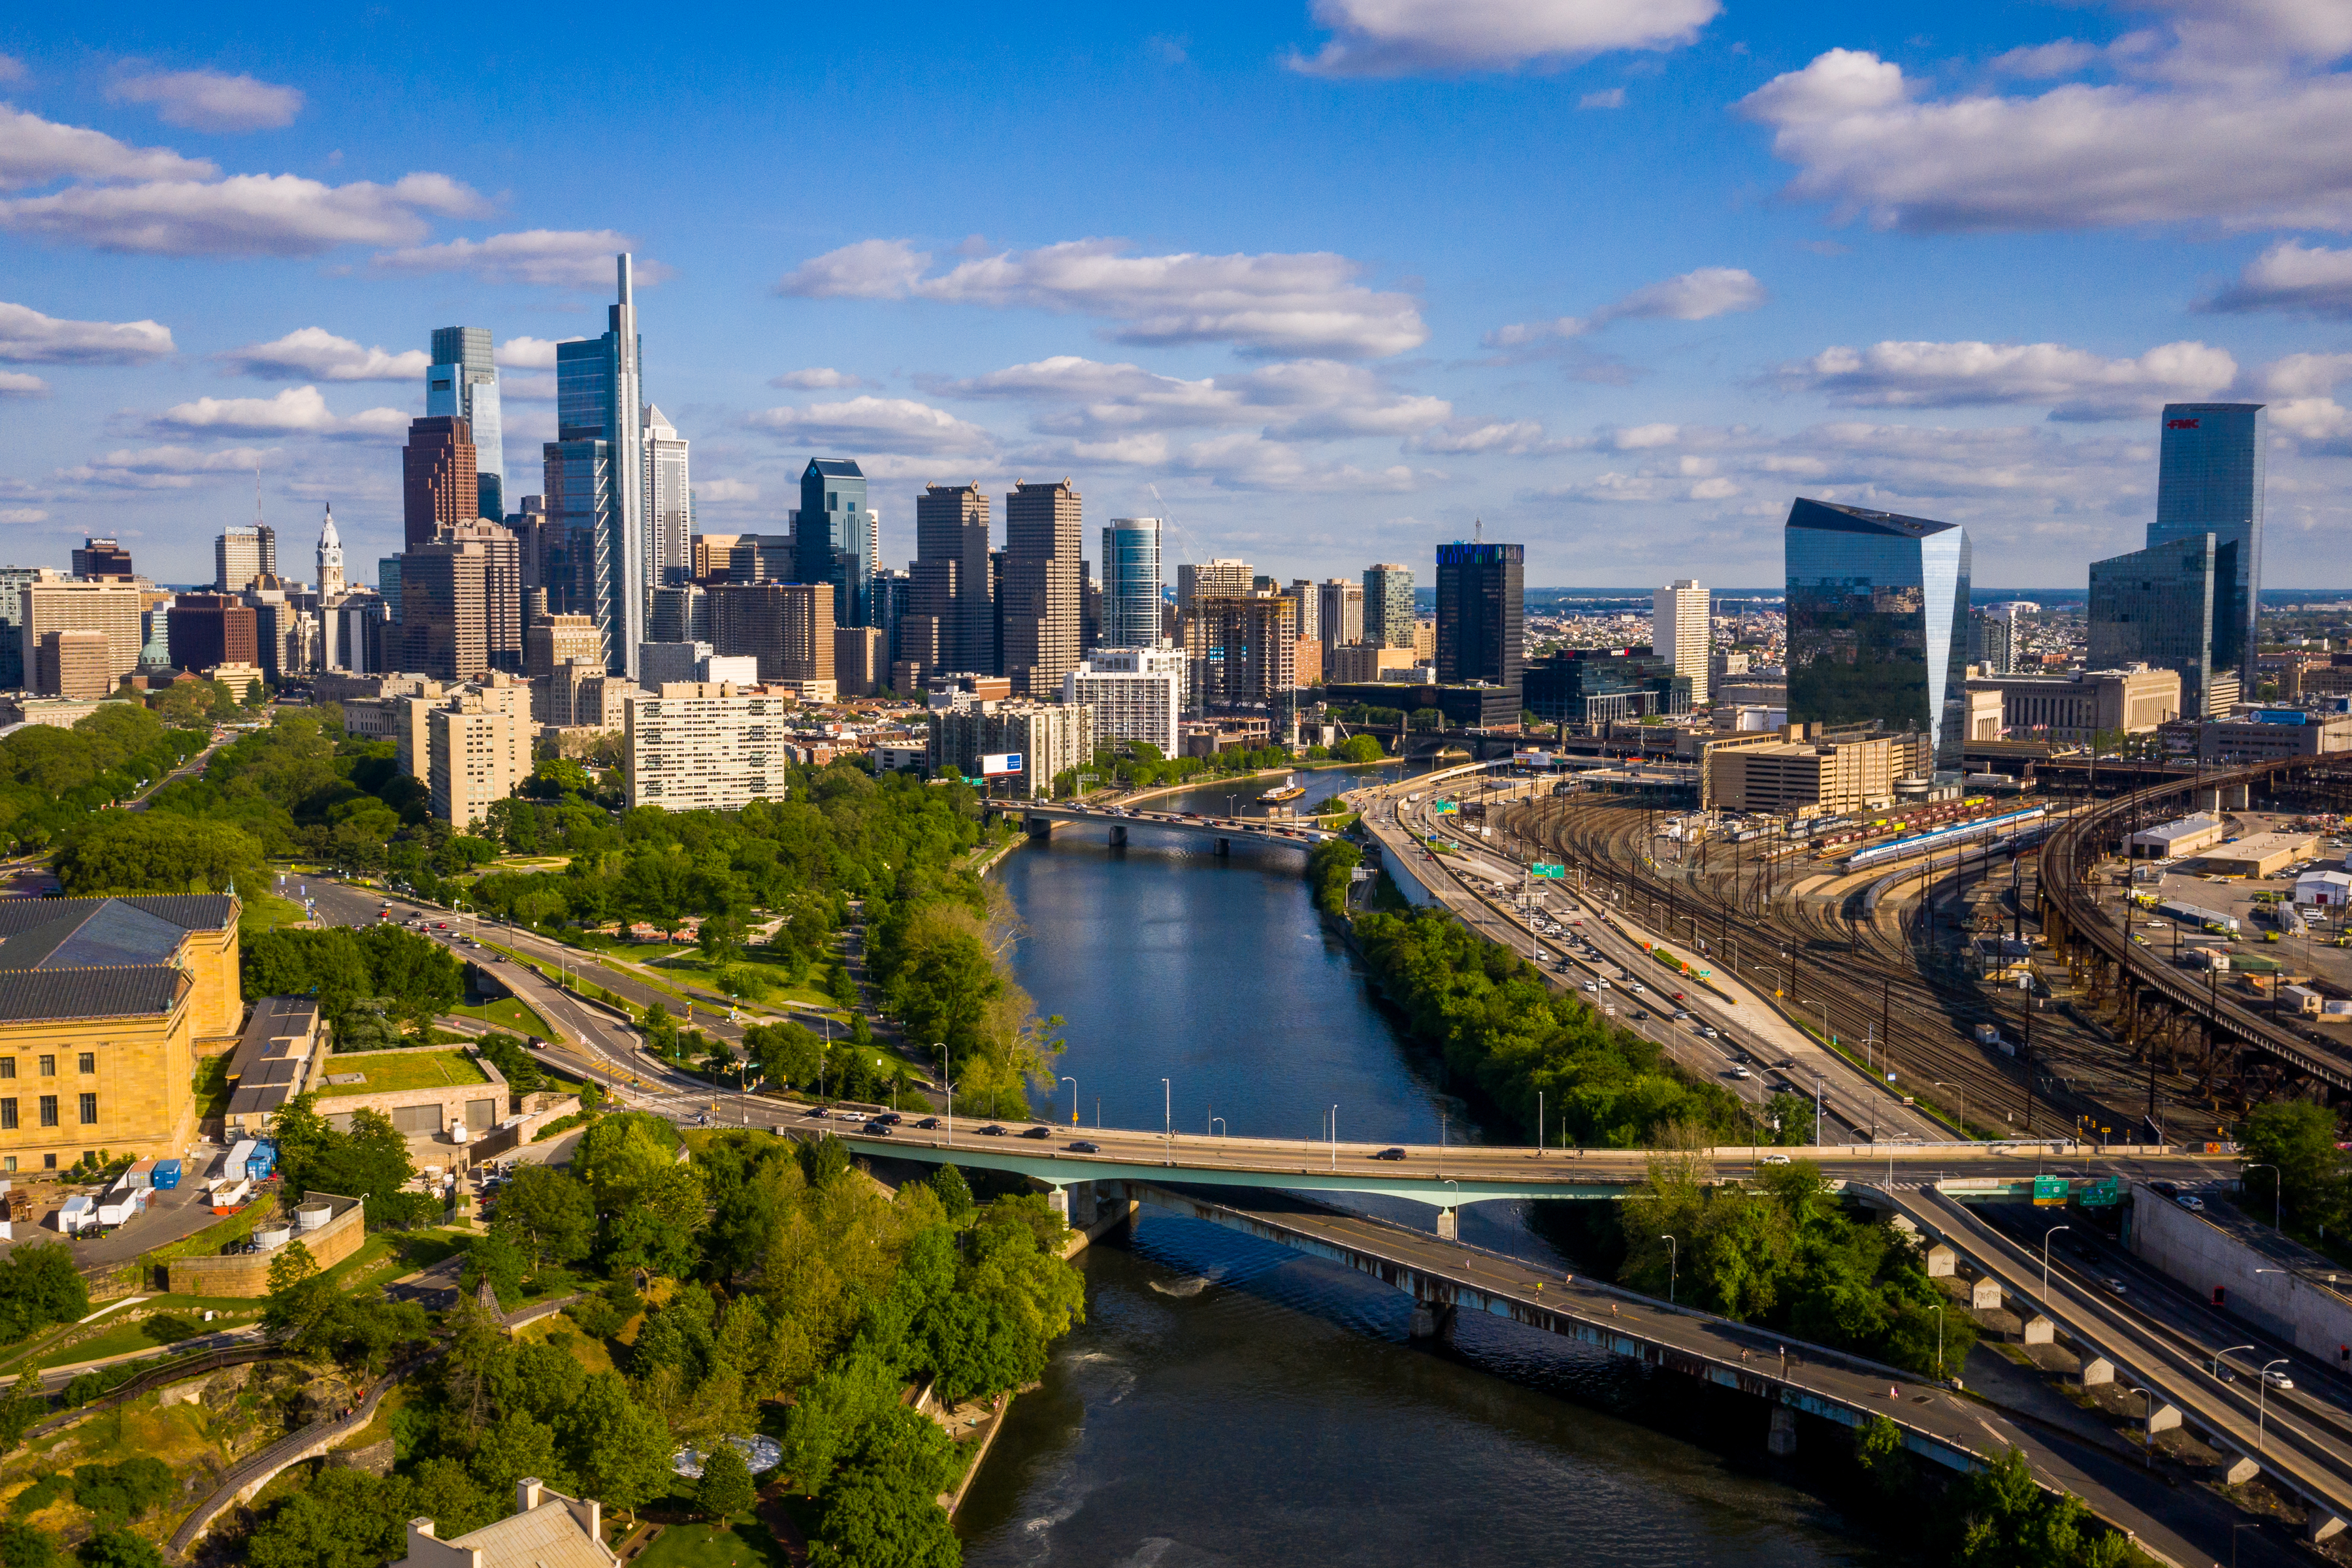 an aerial photo taken over the Schuylkill river near the Fairmount Water Works, looking out over the river downstream towards Center City Philadelphia, with the Art Museum partially visible on the left, 30th St. Station on the right, and bits of South Philly and the Delaware River in the background.